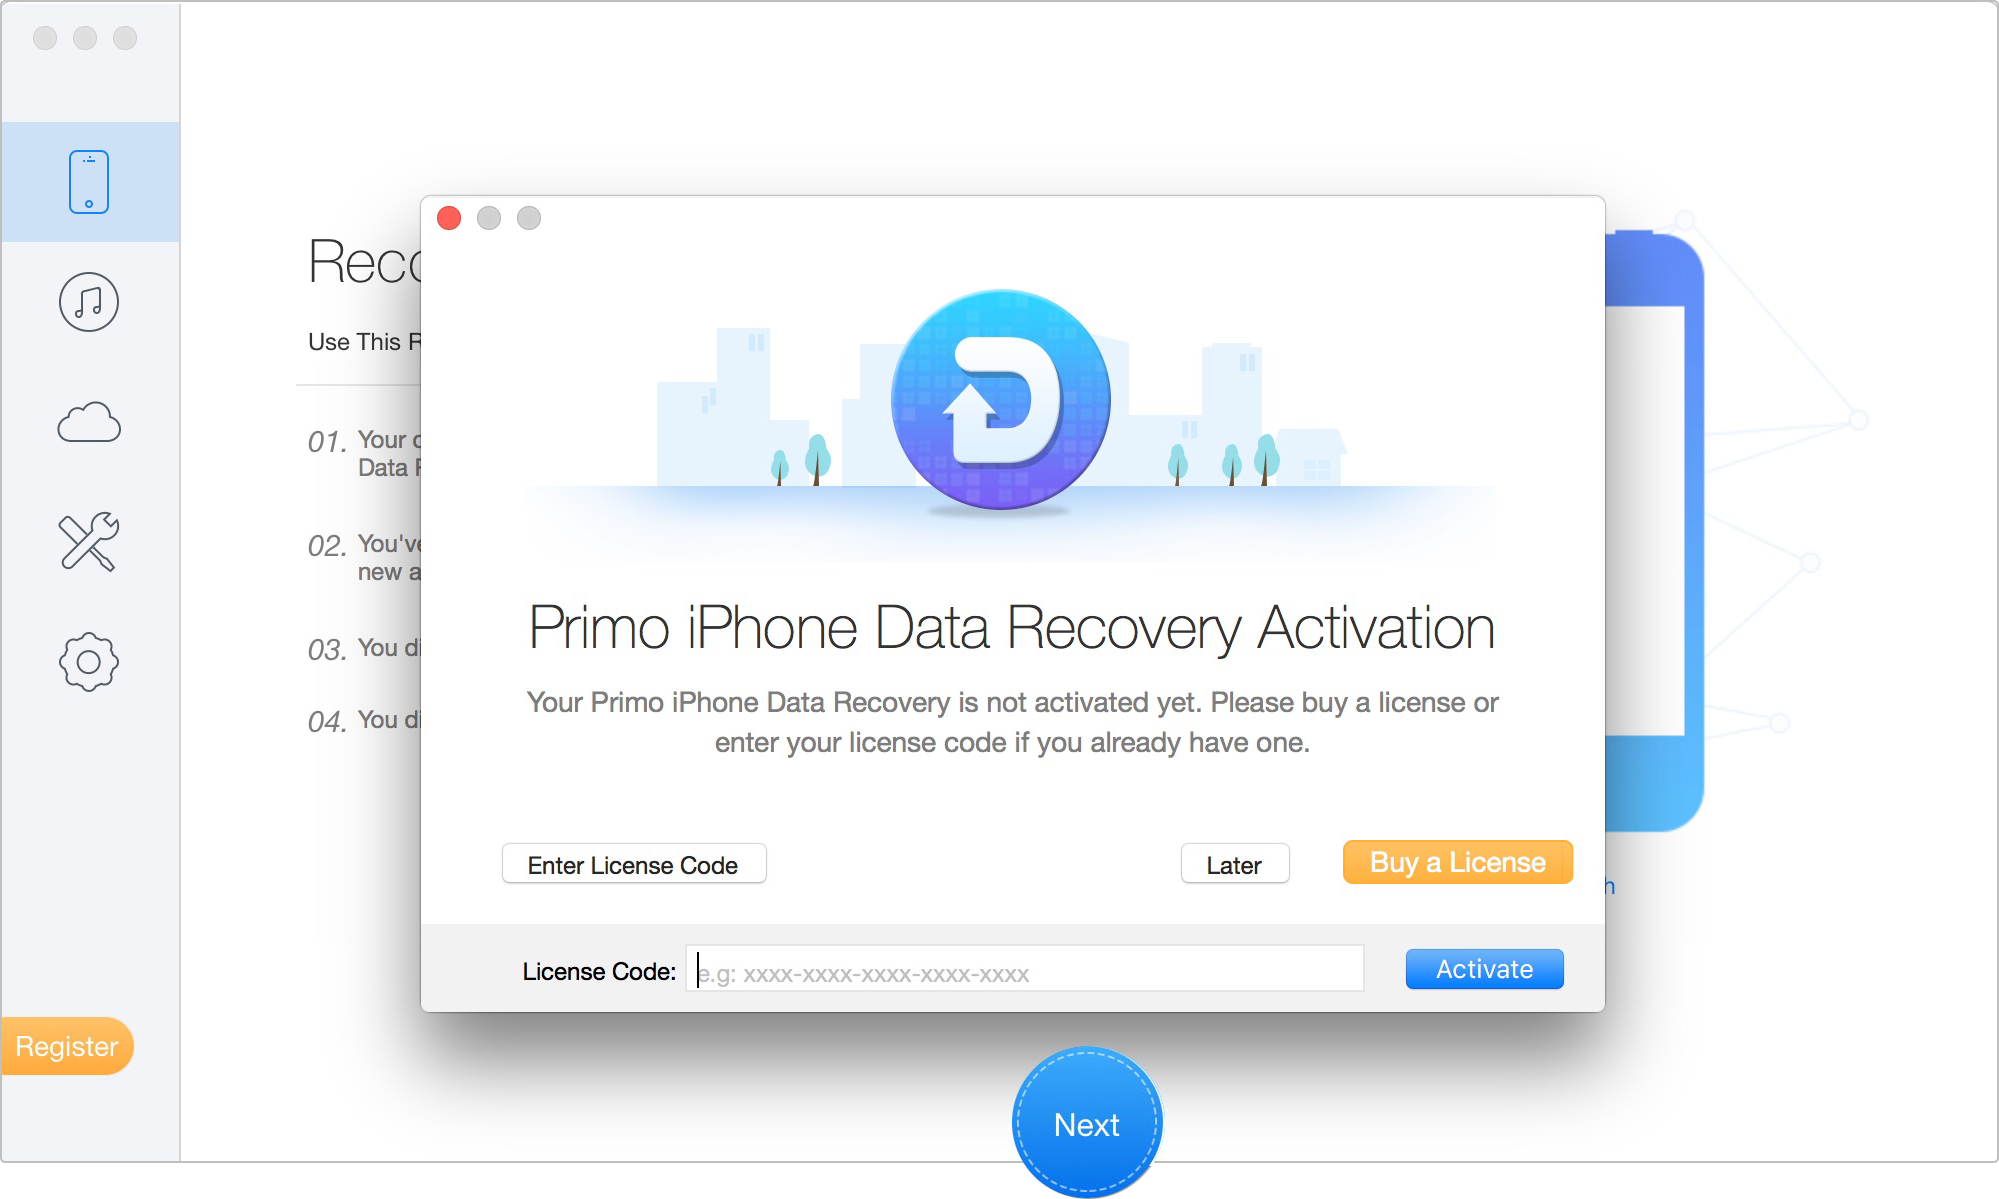 Activate Primo iPhone Data Recovery